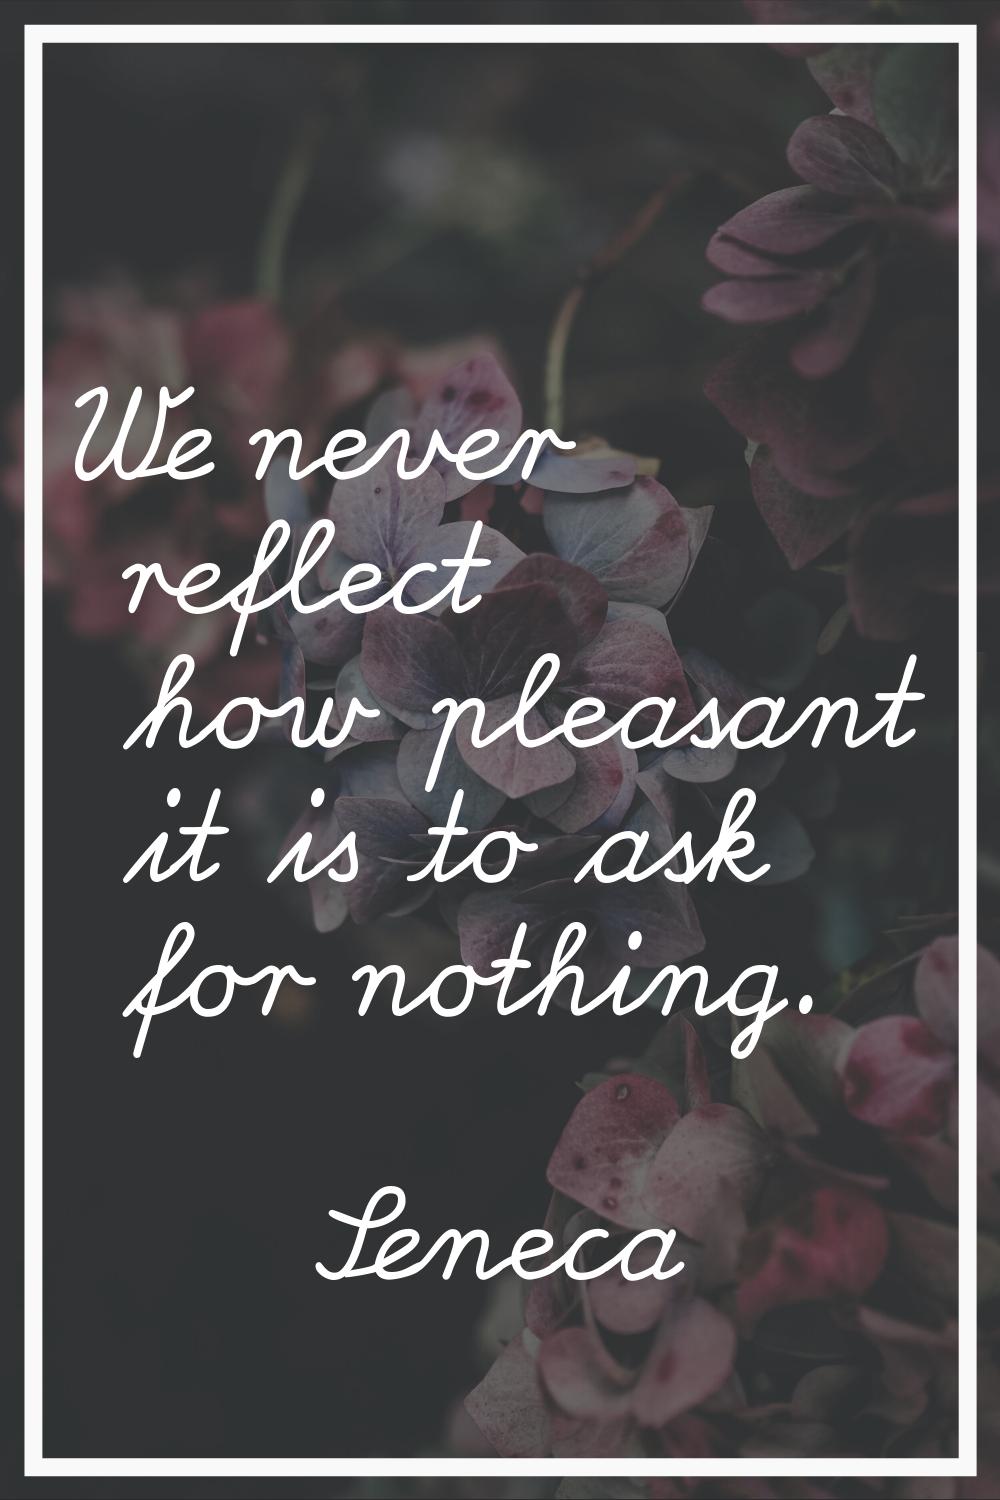 We never reflect how pleasant it is to ask for nothing.